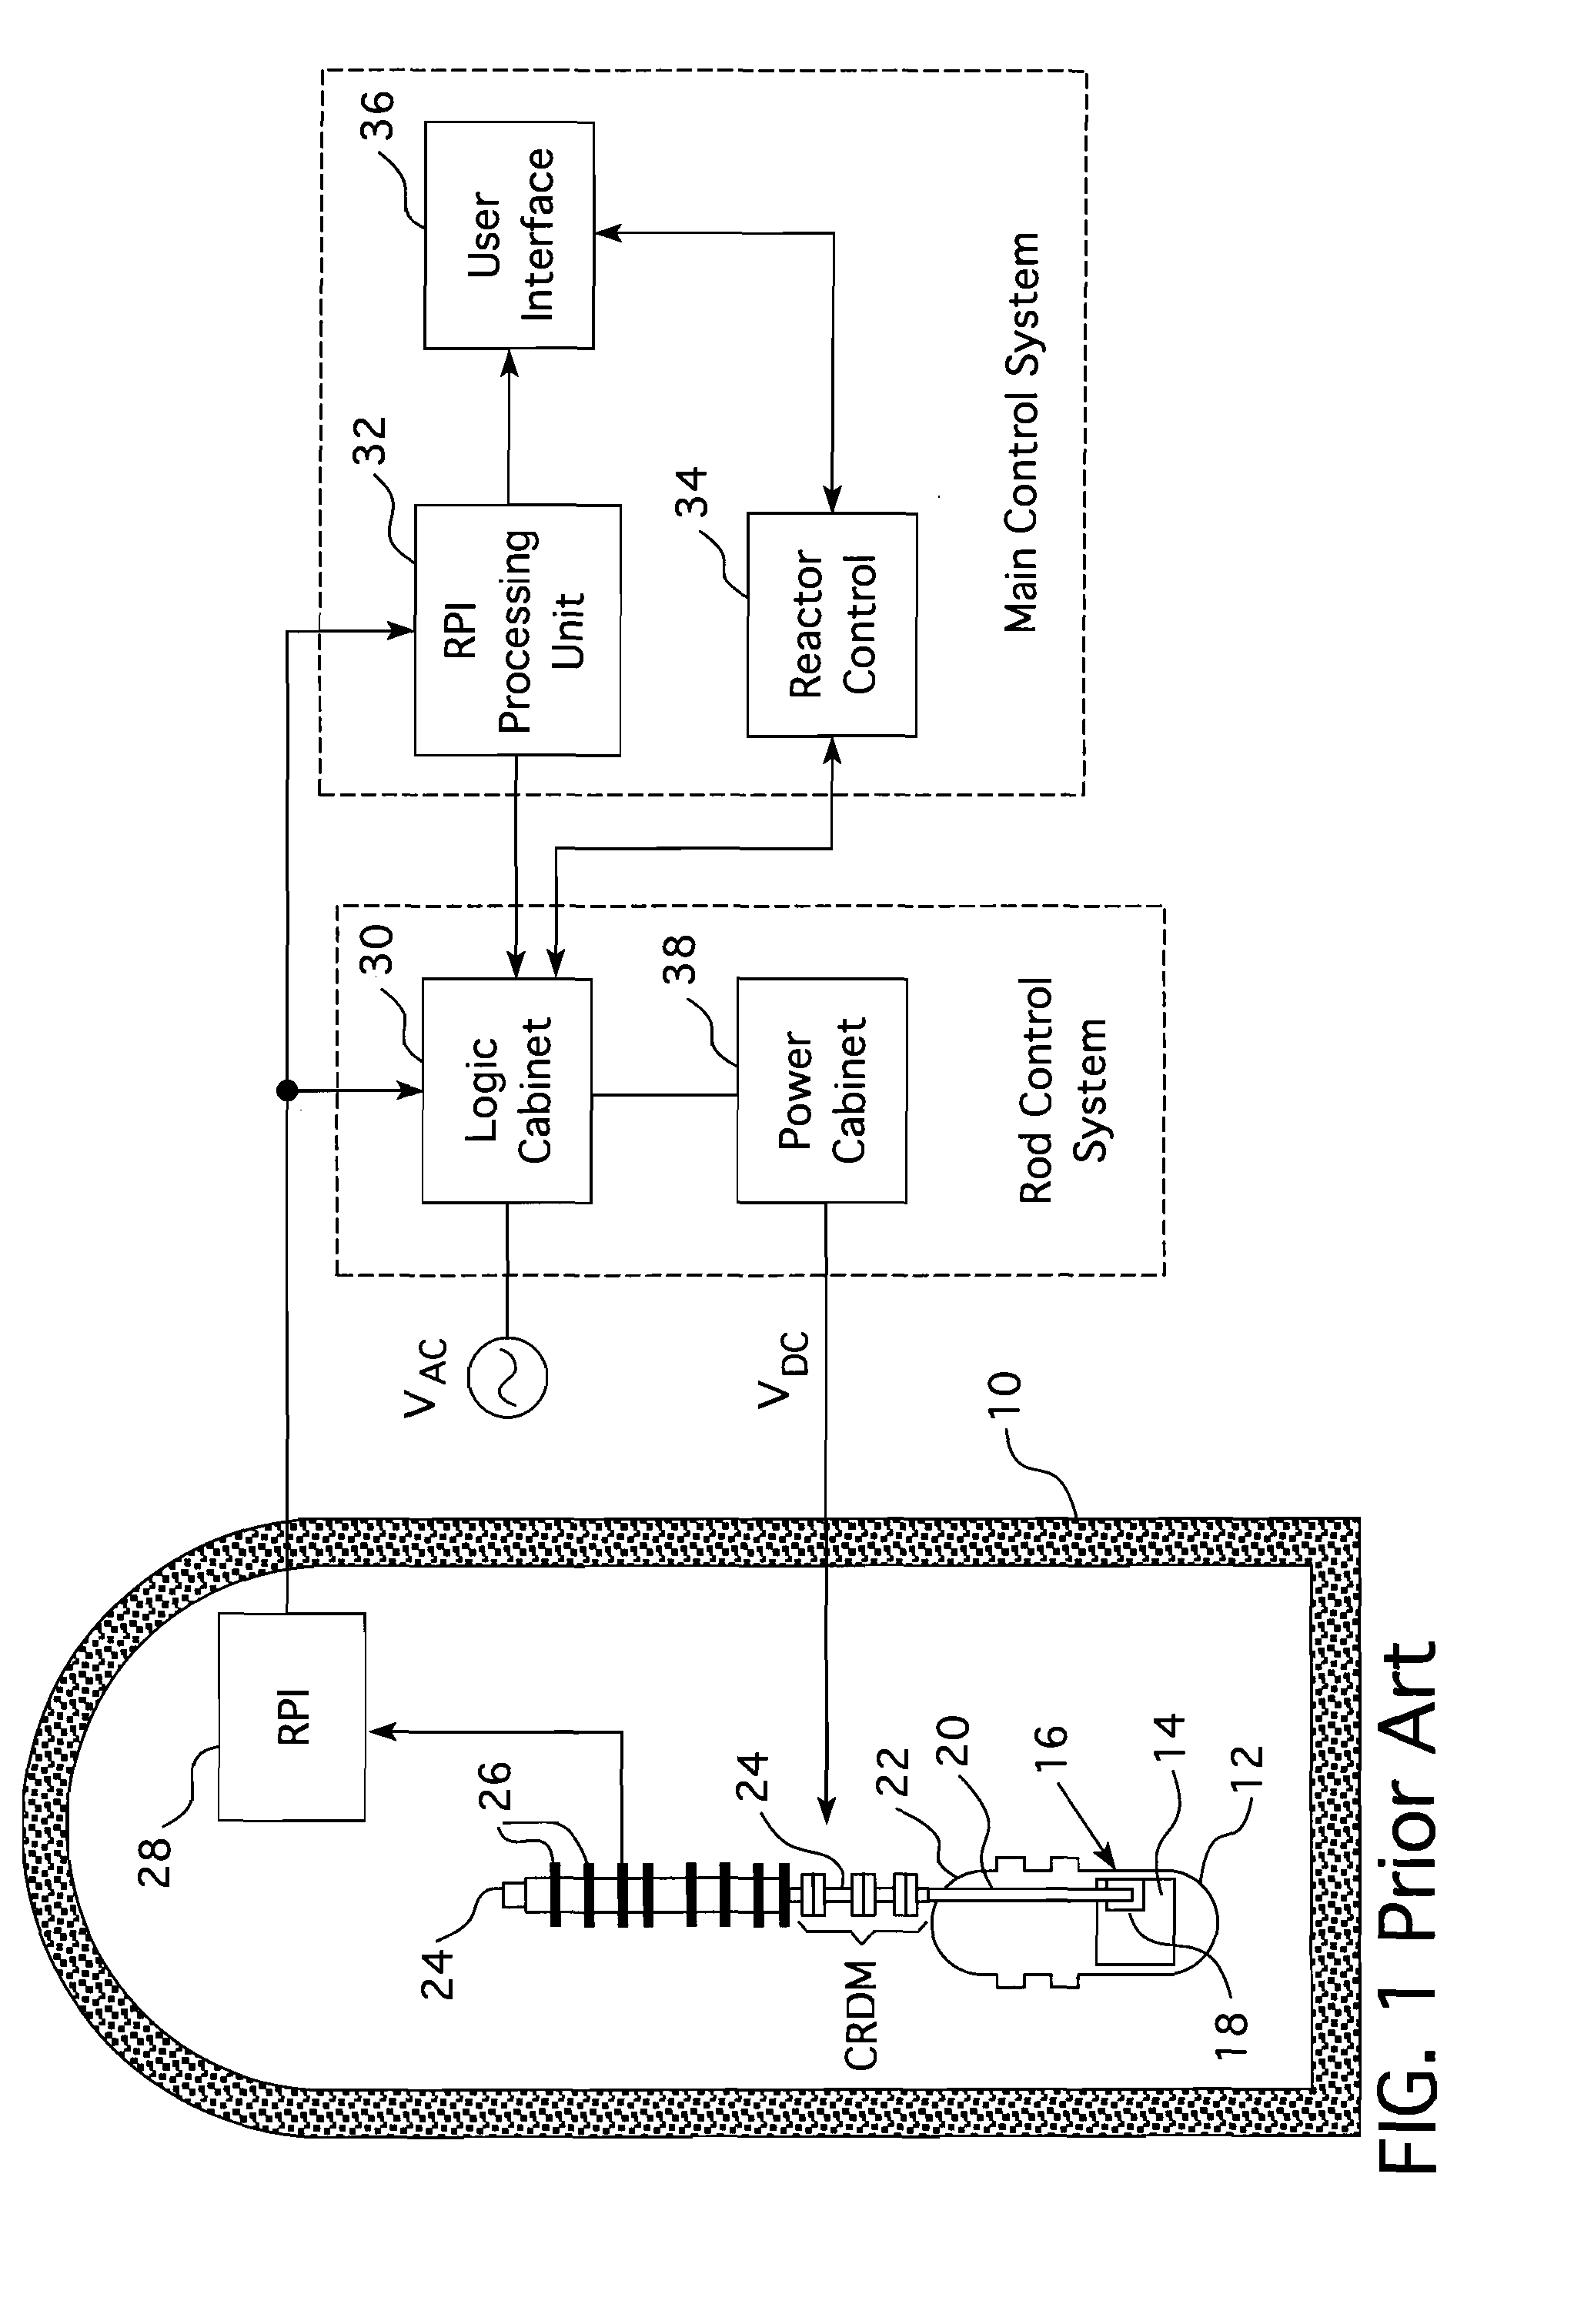 Instrumentation and control penetration flange for pressurized water reactor